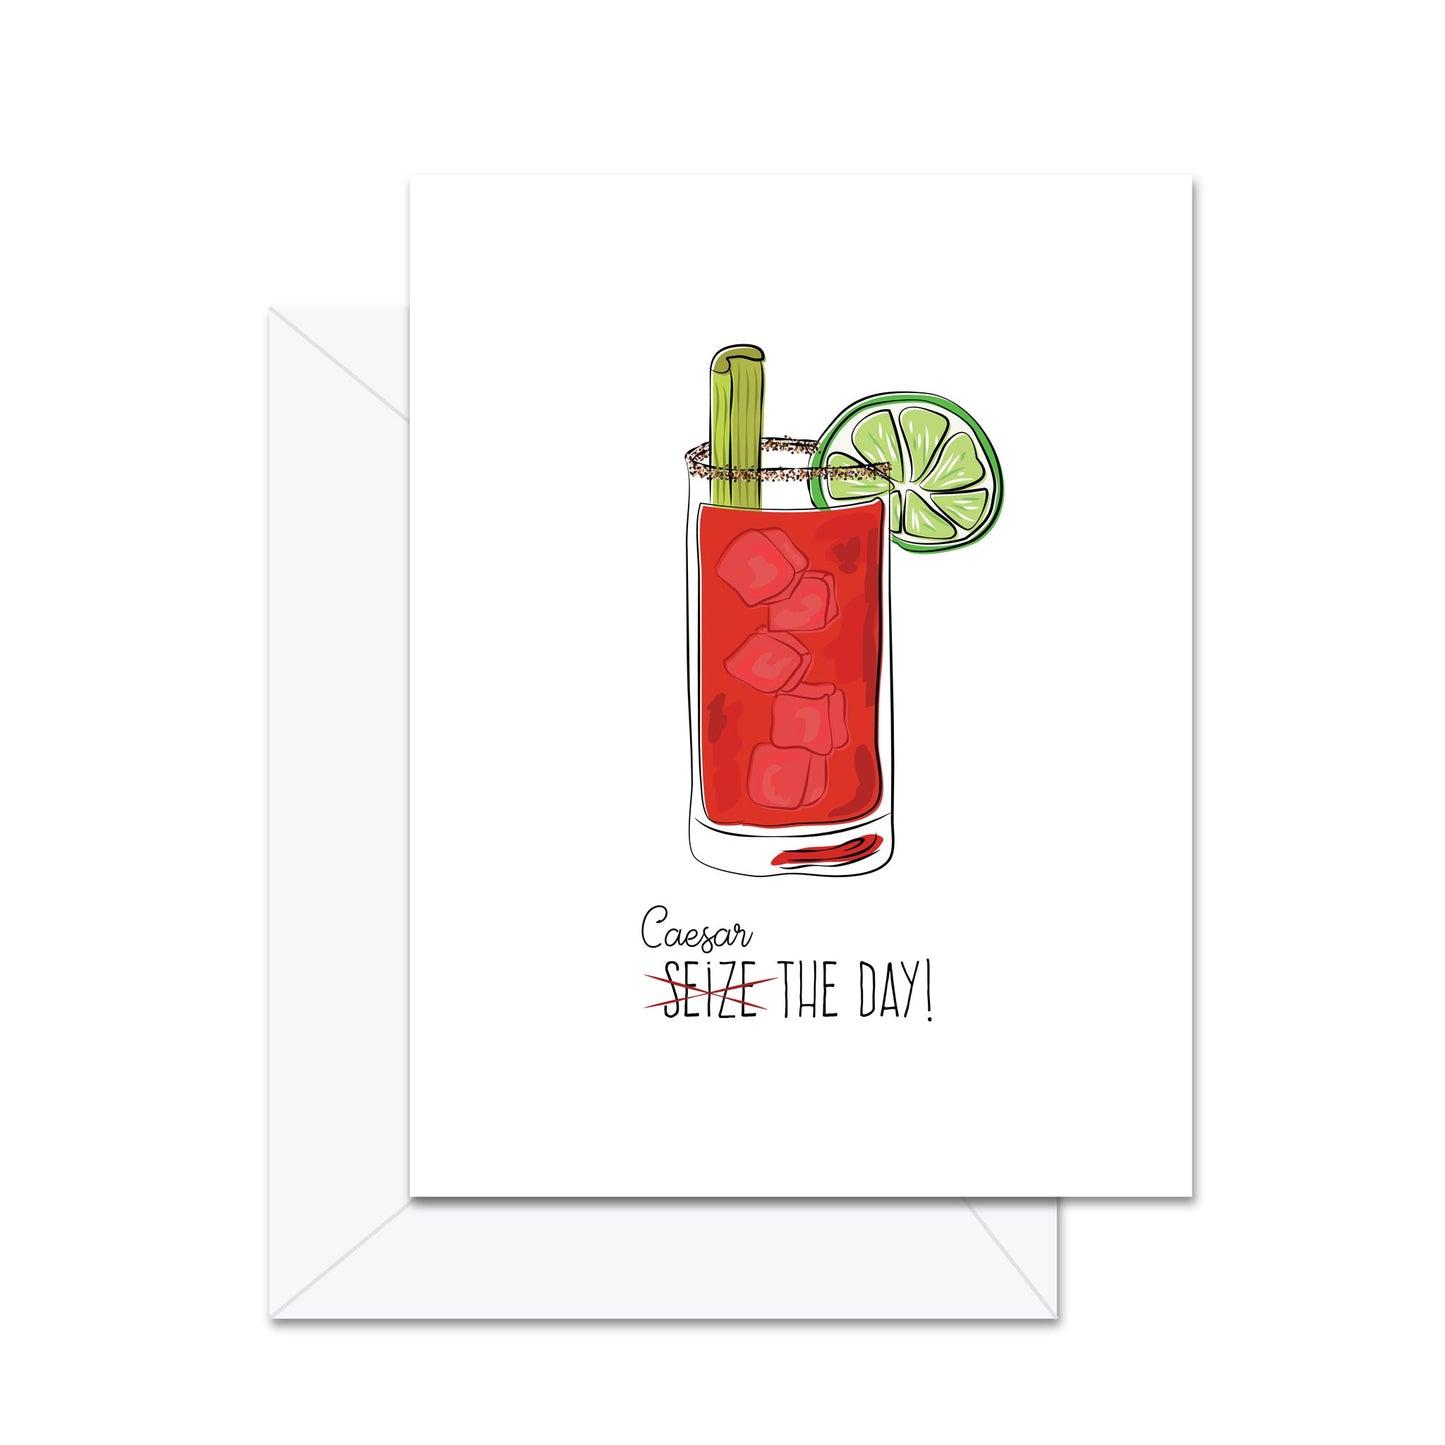 Caesar The Day! - Greeting Card